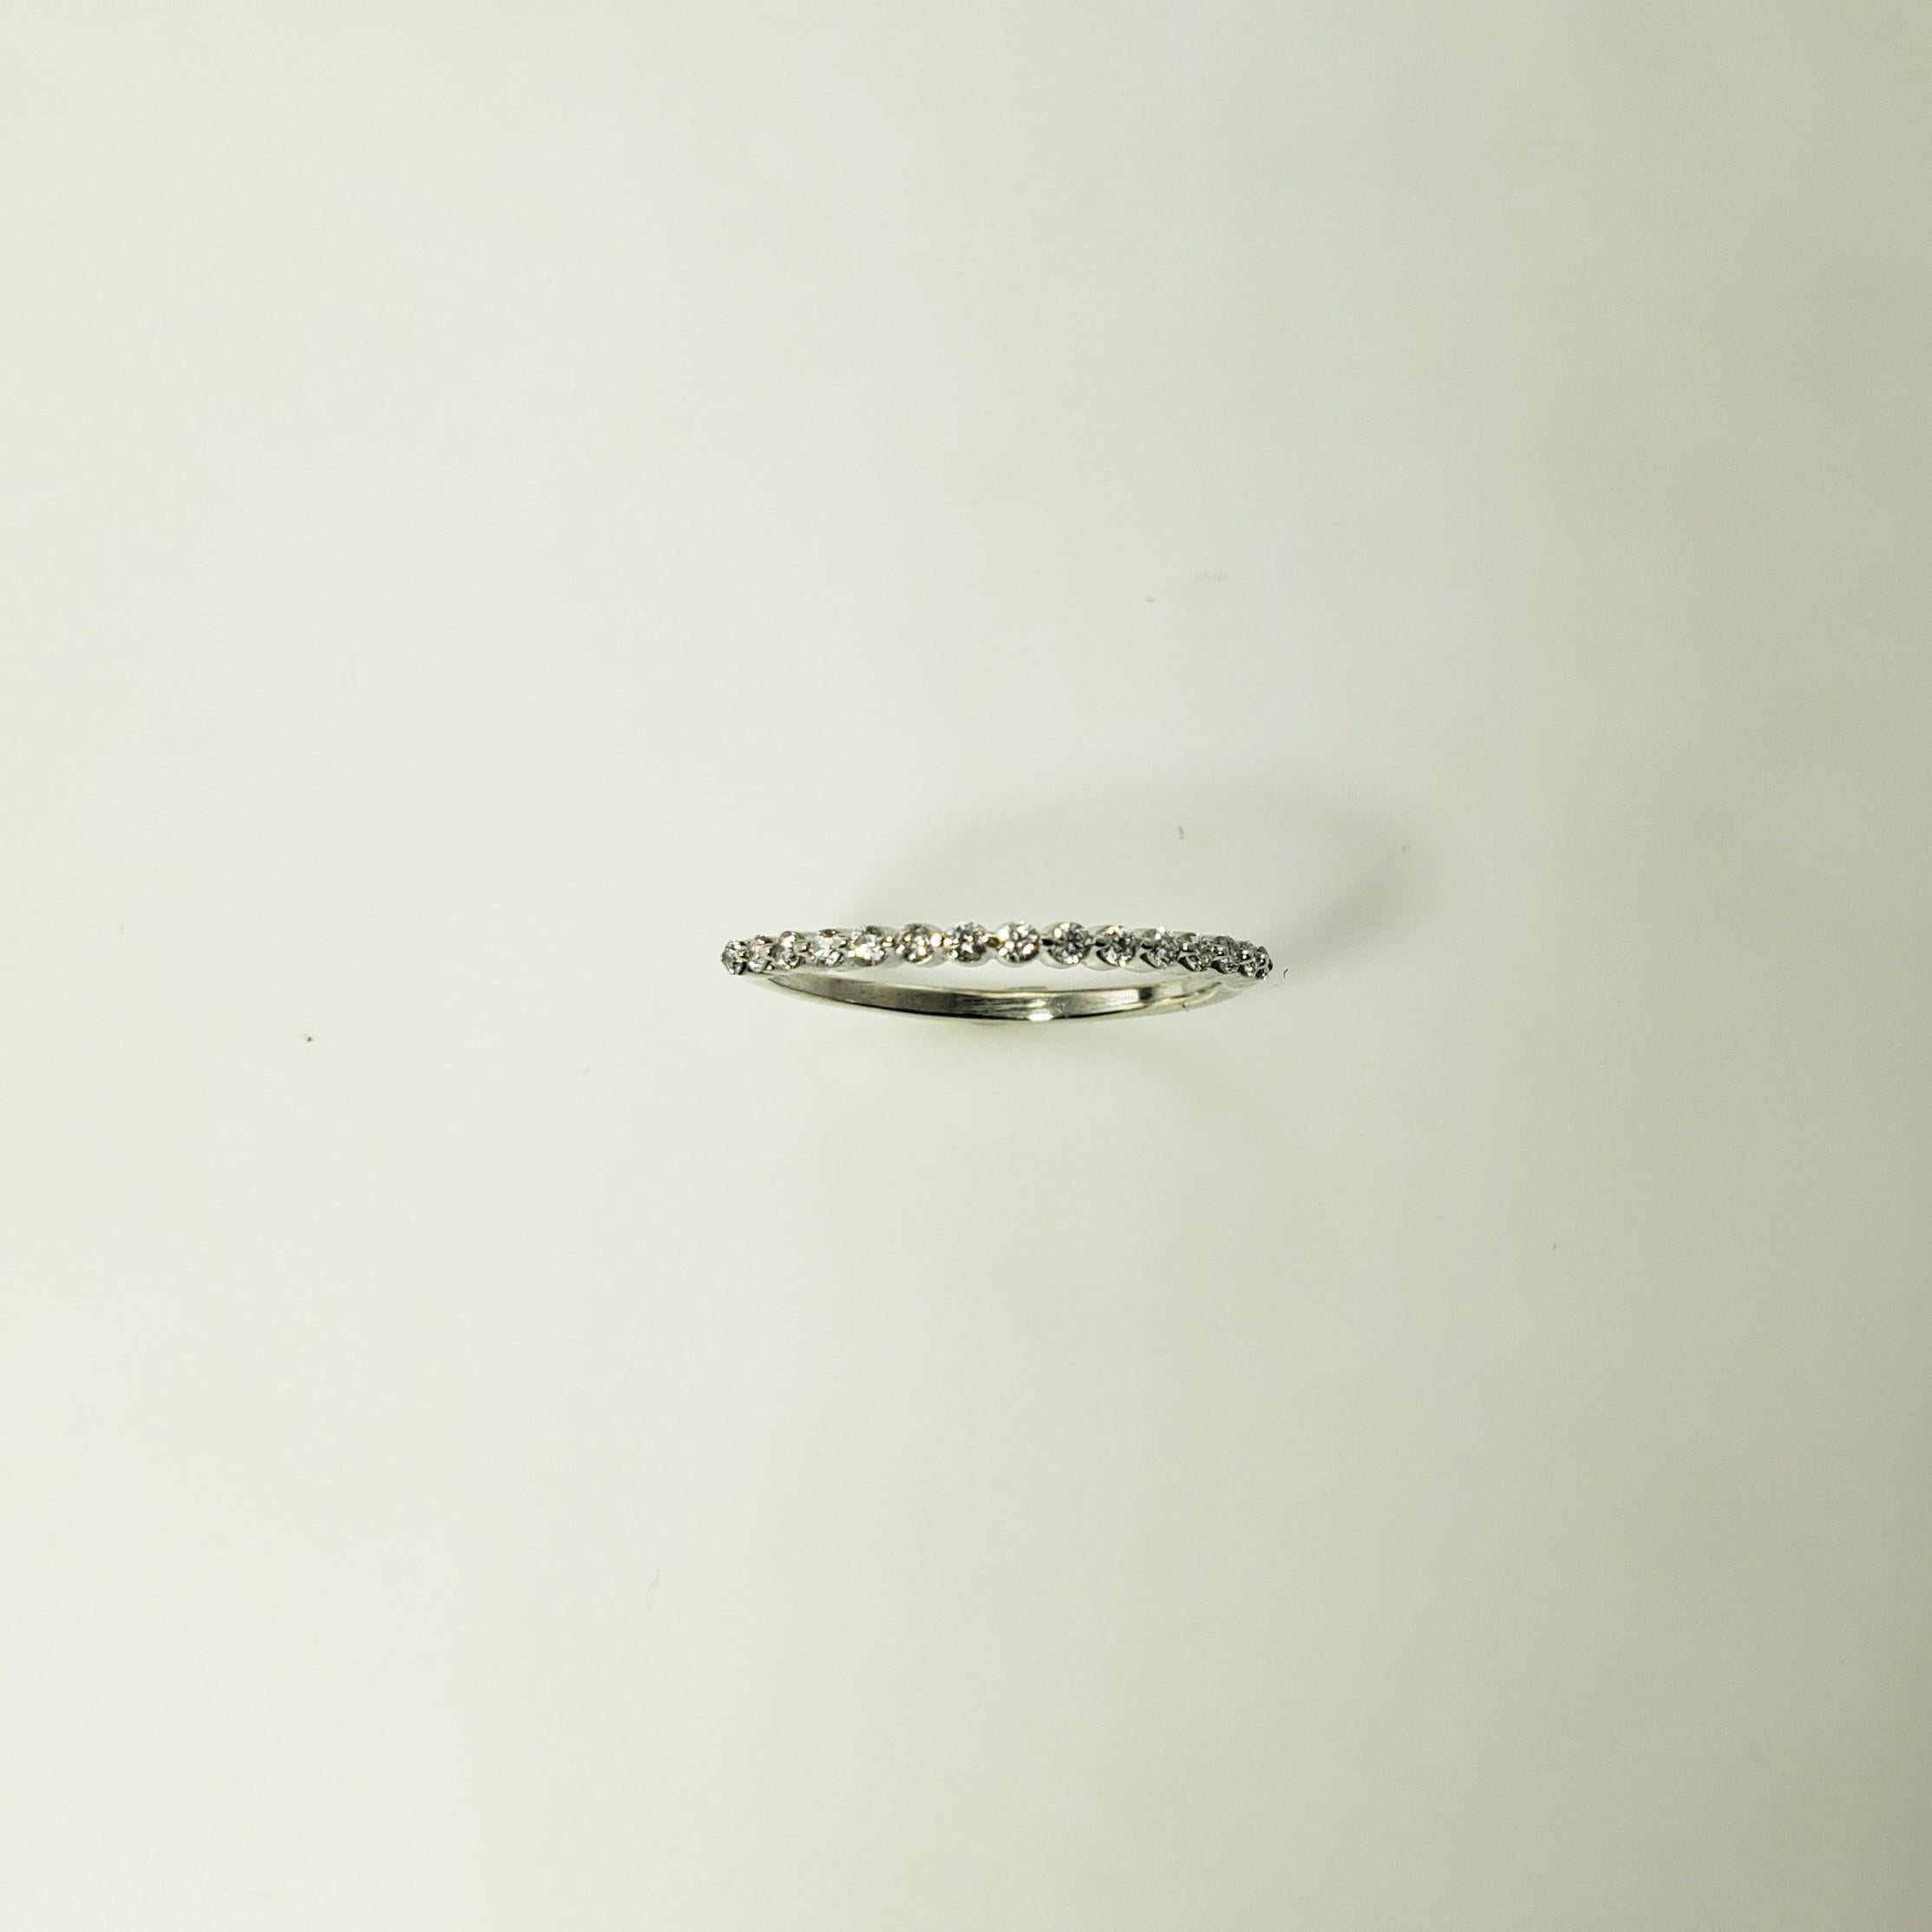 This sparkling band features 15 round brilliant cut diamonds set in classic 10K white gold.  Width:  1.5 mm.

Approximate total diamond weight:  .15 ct.

Diamond color: I

Diamond clarity: SI1

Size:  5.25

Weight: 0.4  dwt. /  0.7 gr.

Tested 10K